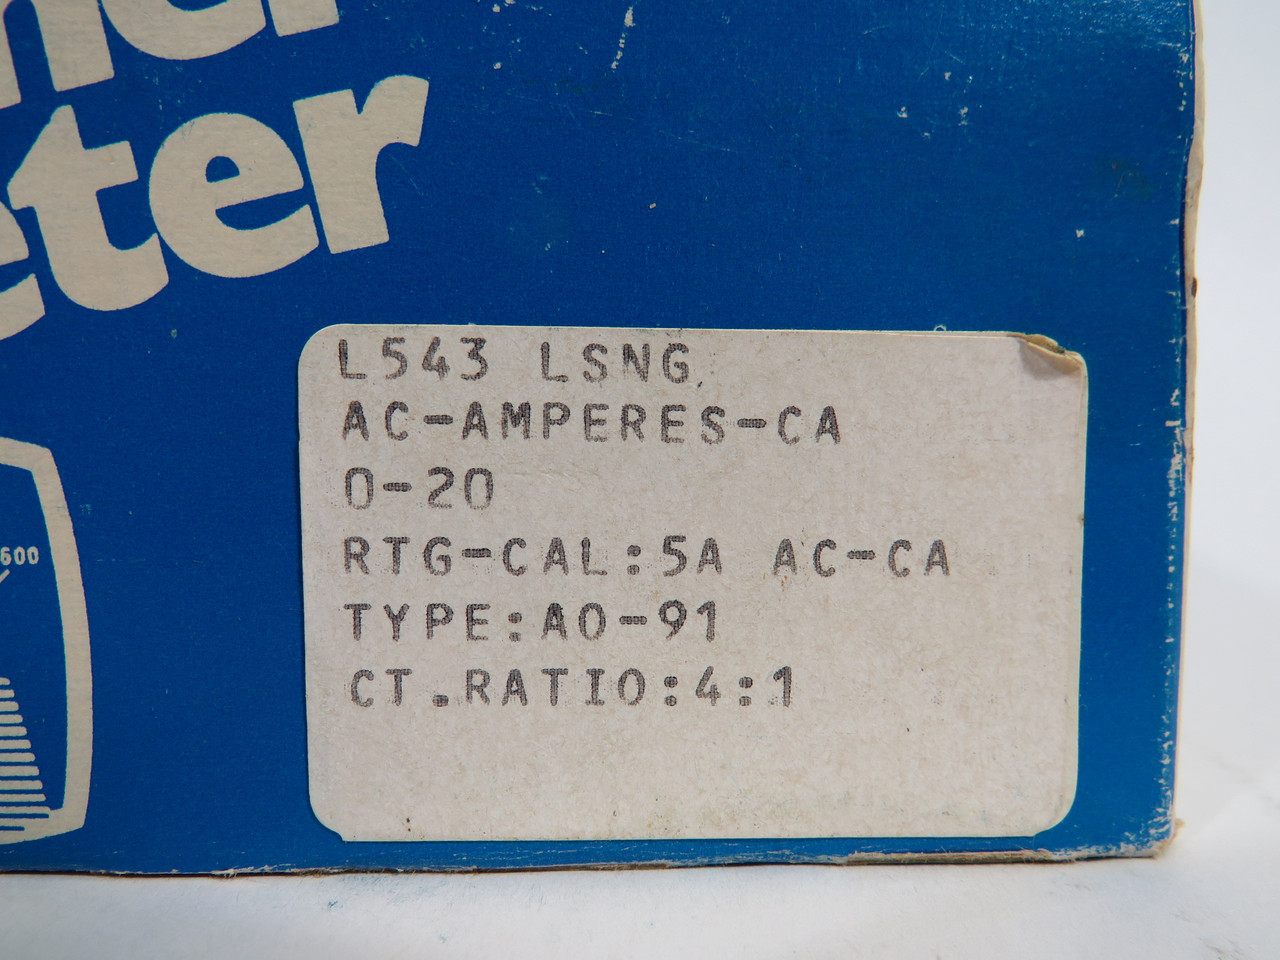 General Electric L543-LSNG AC Panel Meter 0-20A 4:1 CT Ratio ! NEW !